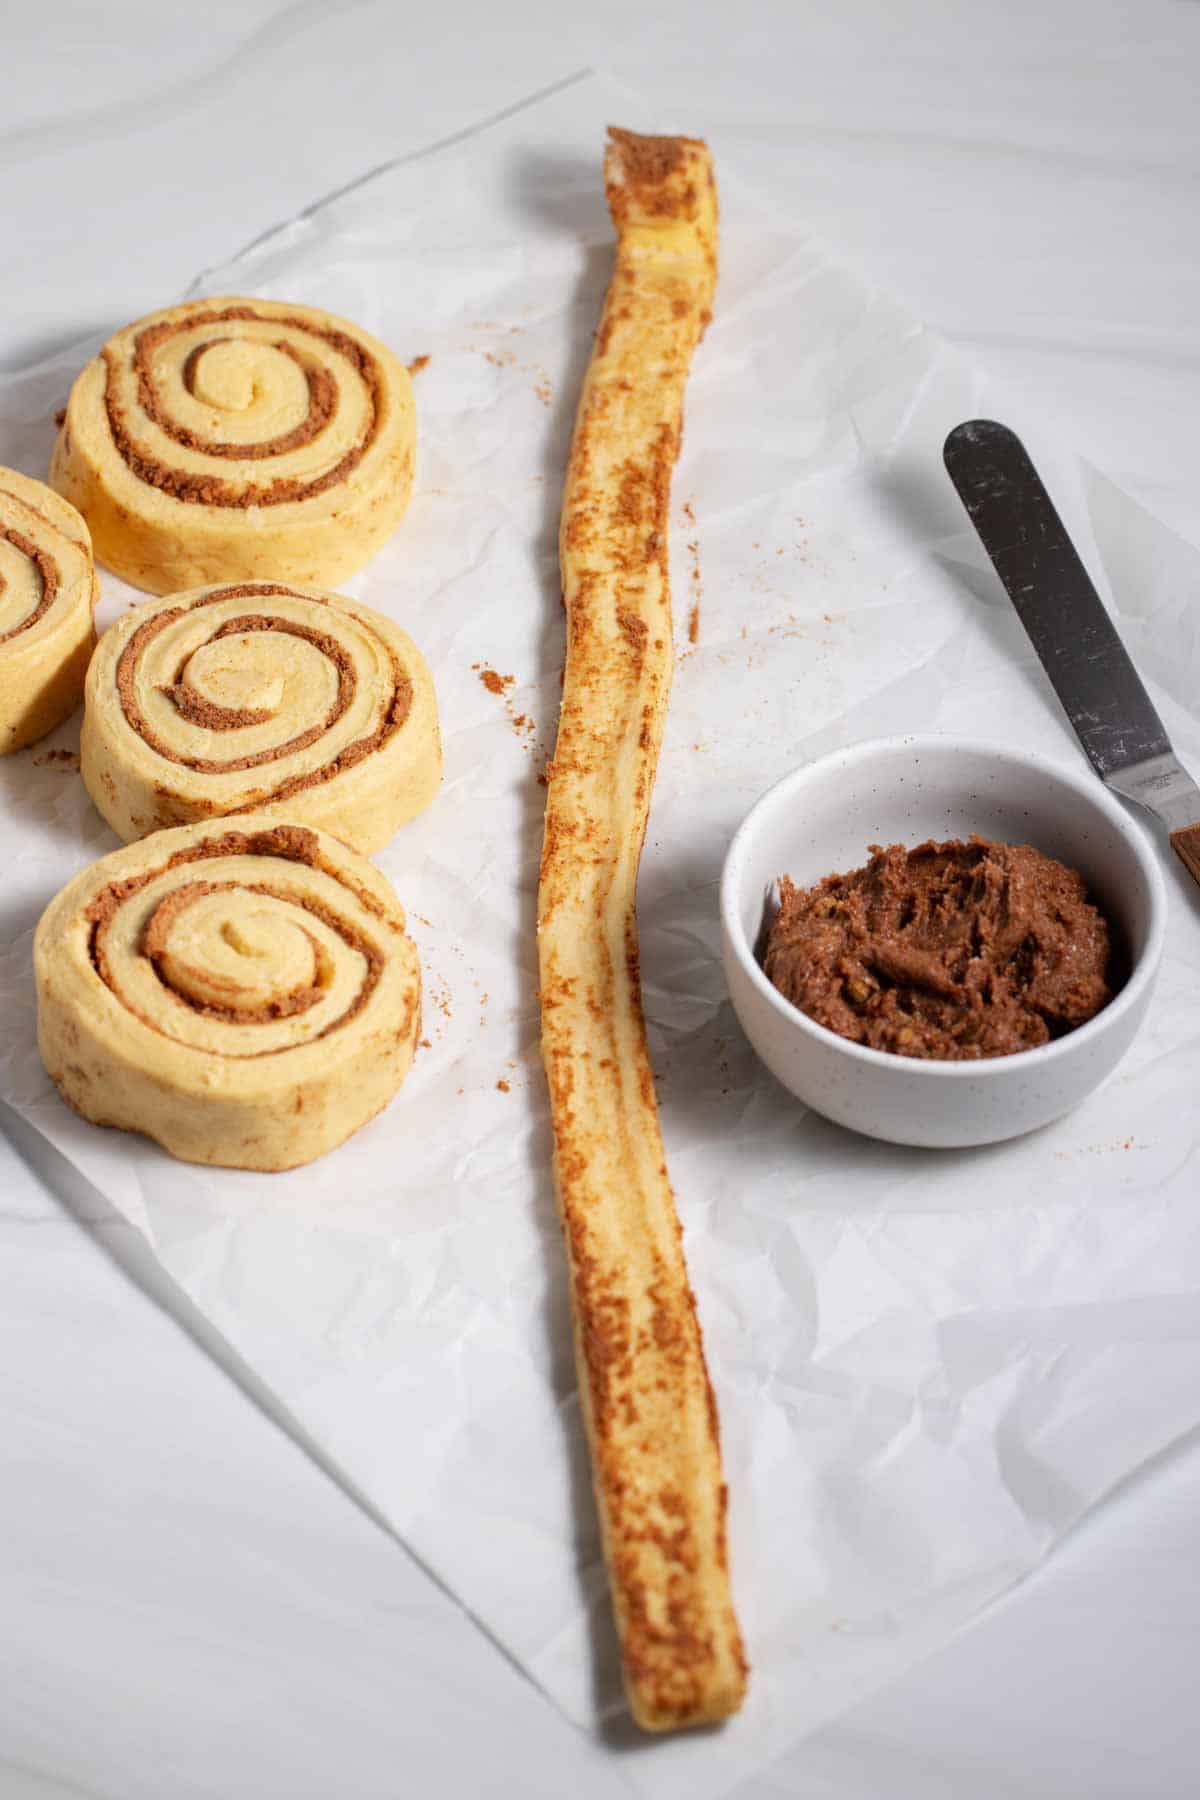 Unrolled cinnamon roll with bowl of butter, brown sugar, and cinnamon mixture.